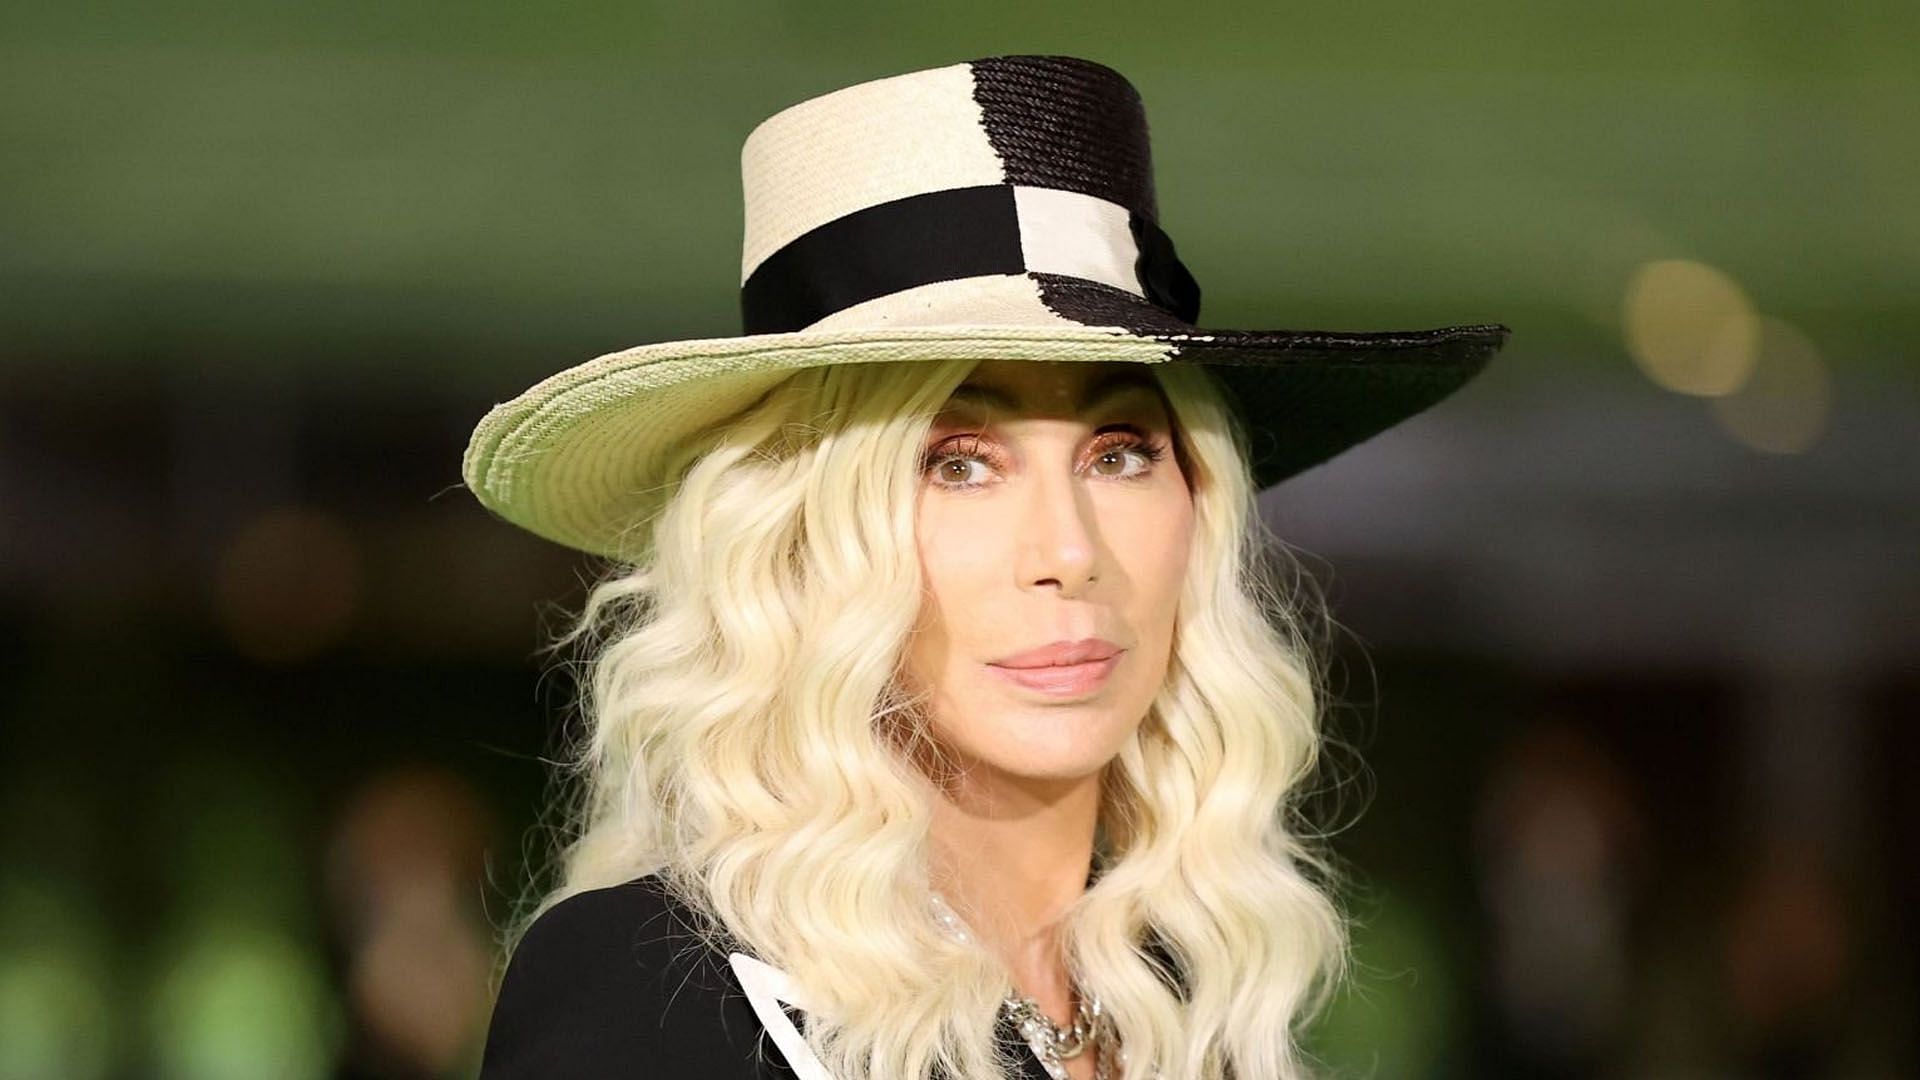 Rumors of Singer Cher dying are false (image via Getty Images)